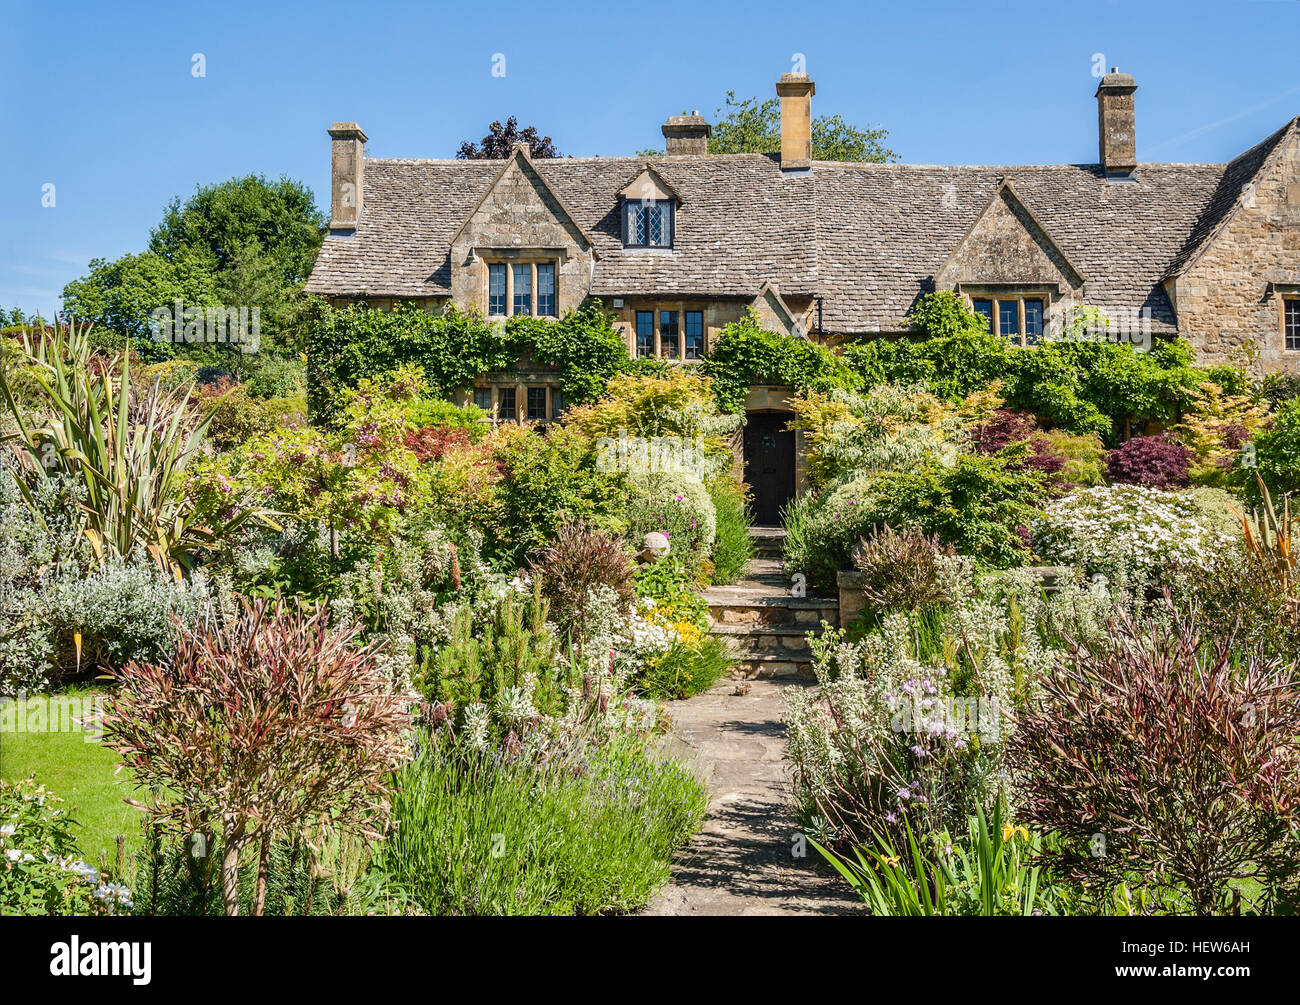 Cotsworld House in Chipping Campden. Chipping Campden a small market town within the Cotswold district of Gloucestershire, England Stock Photo